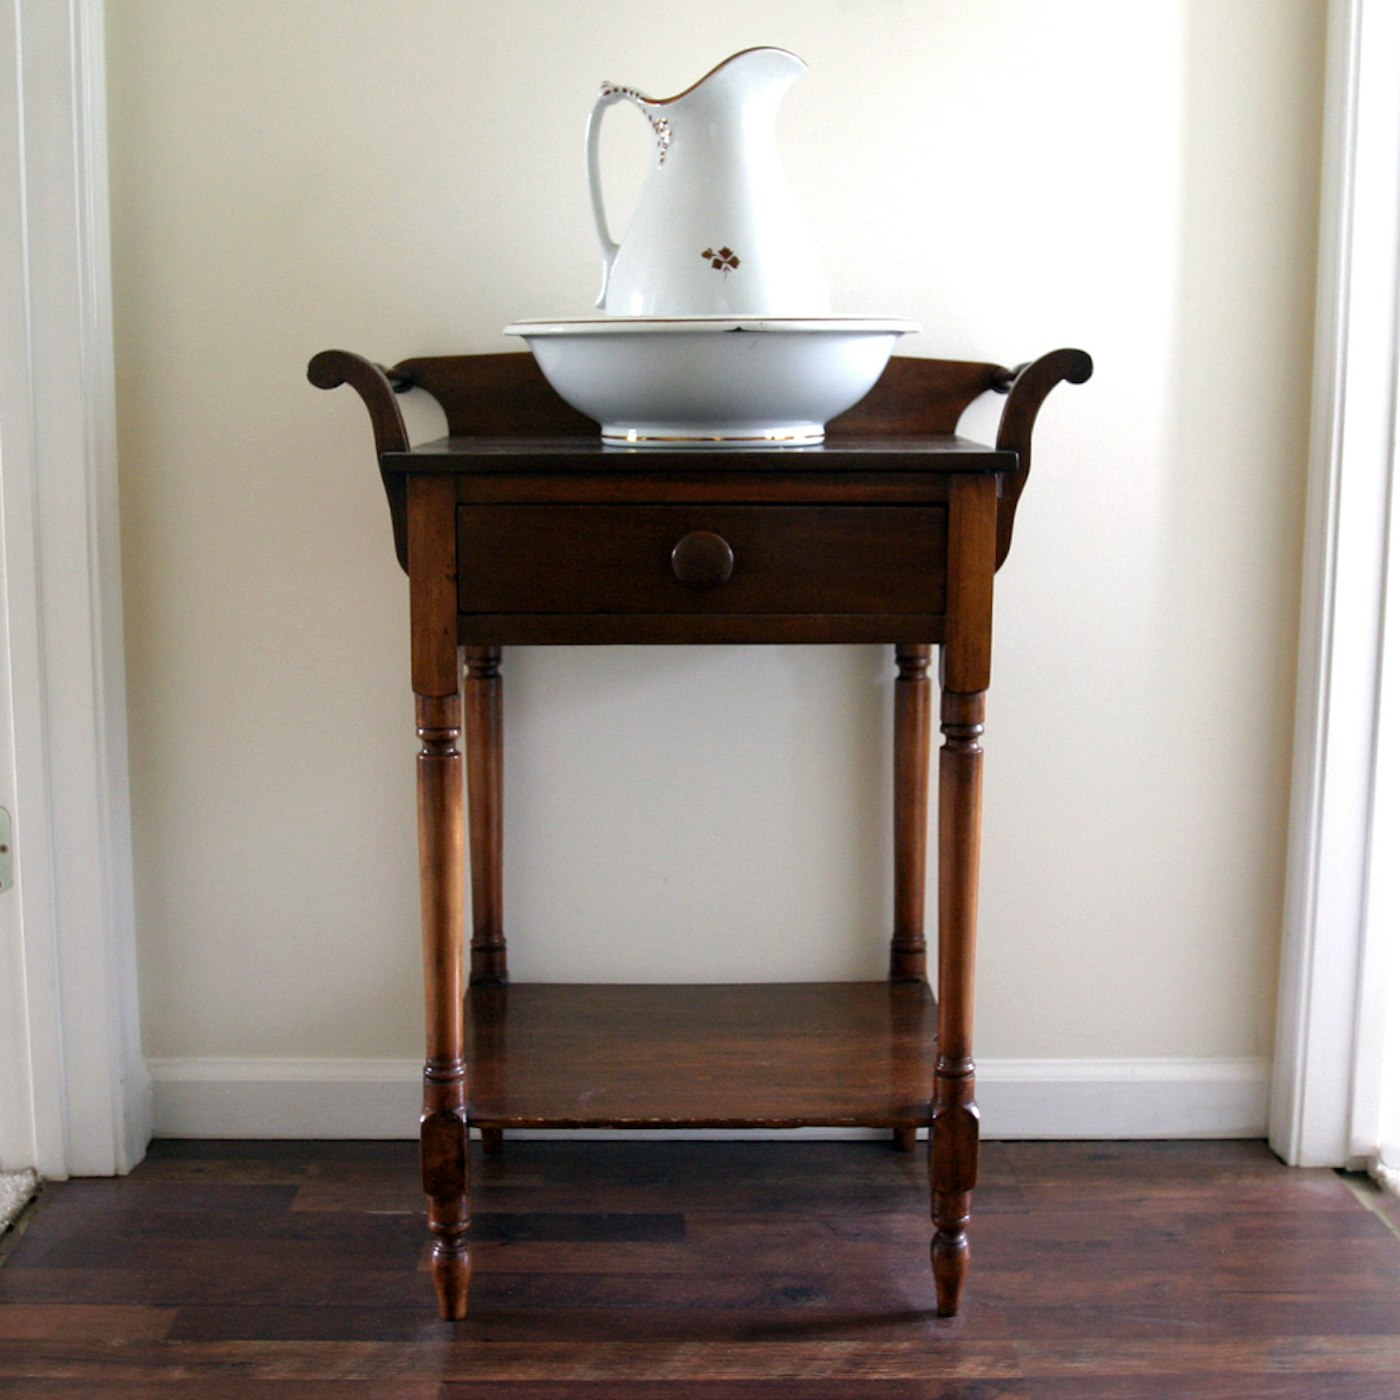 Antique Washstand With Pitcher and Basin EBTH